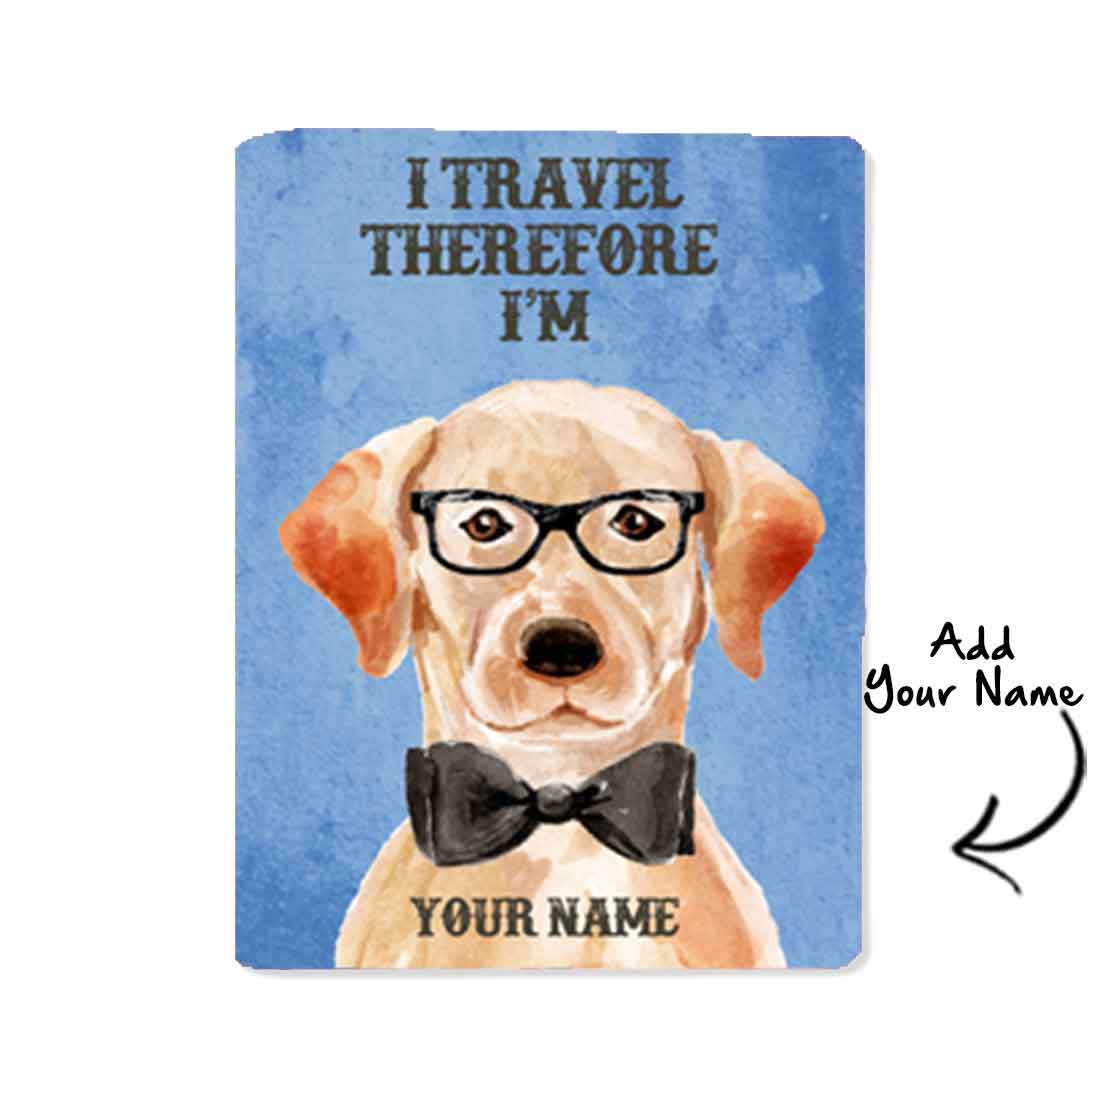 Personalised Passport Cover Travel Luggage Tag - Cute Hipster Dog Nutcase